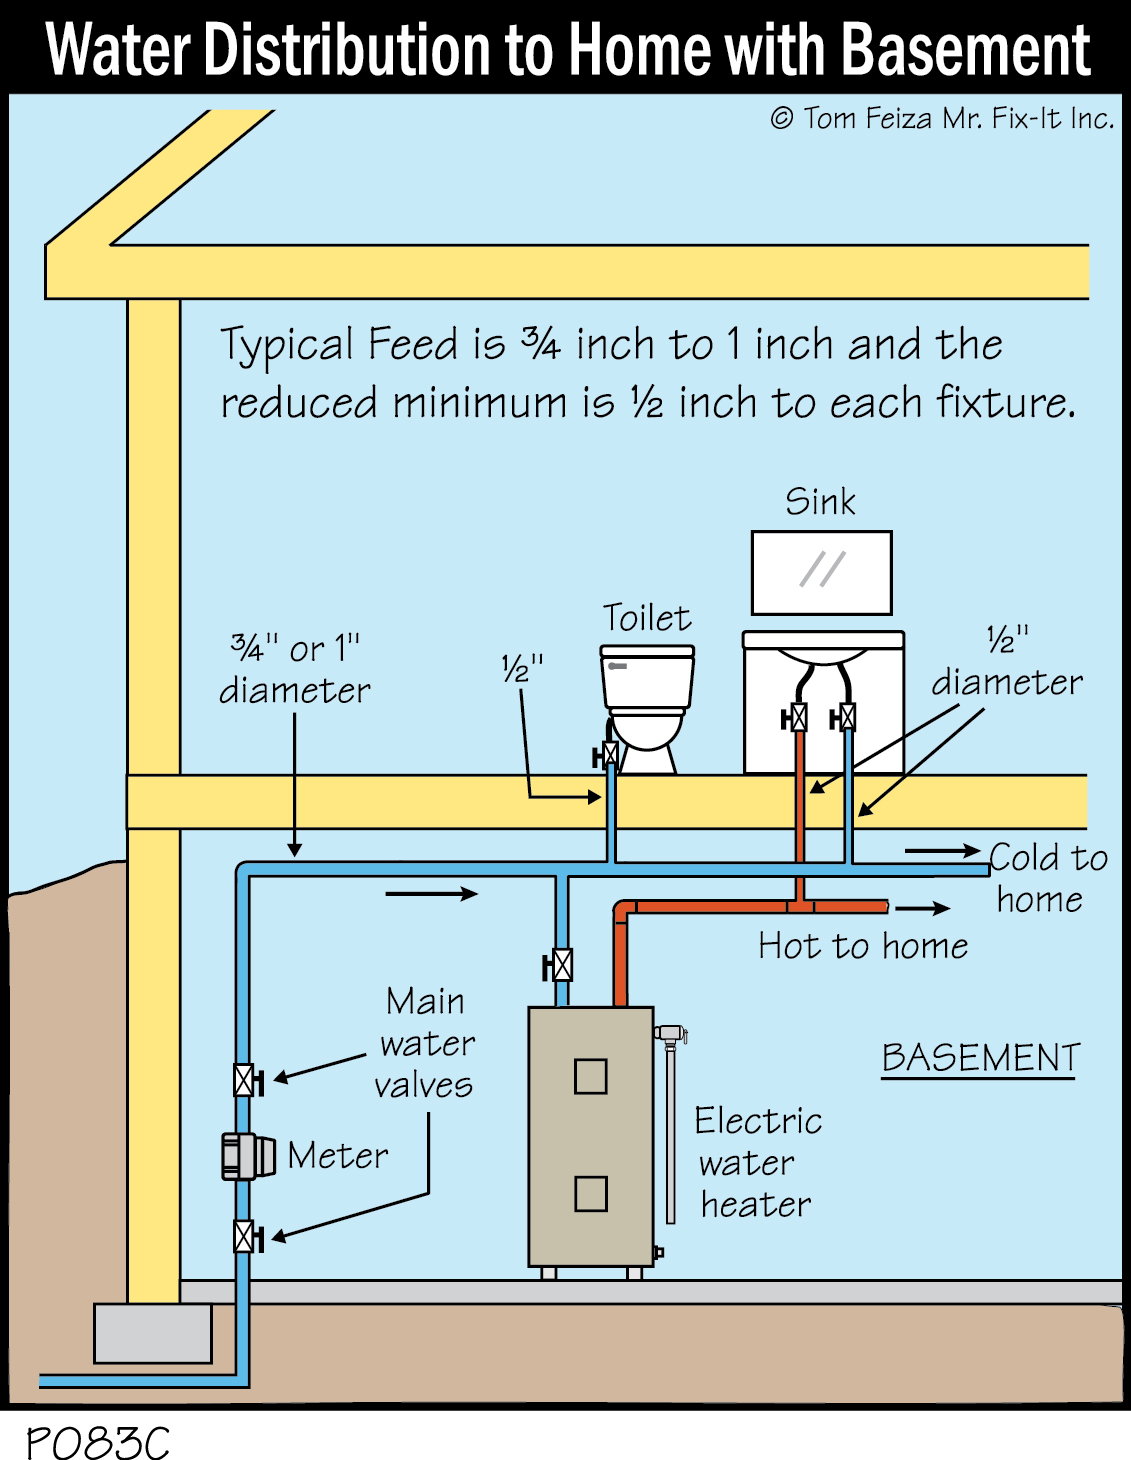 P083C - Water Distribution to Home with Basement